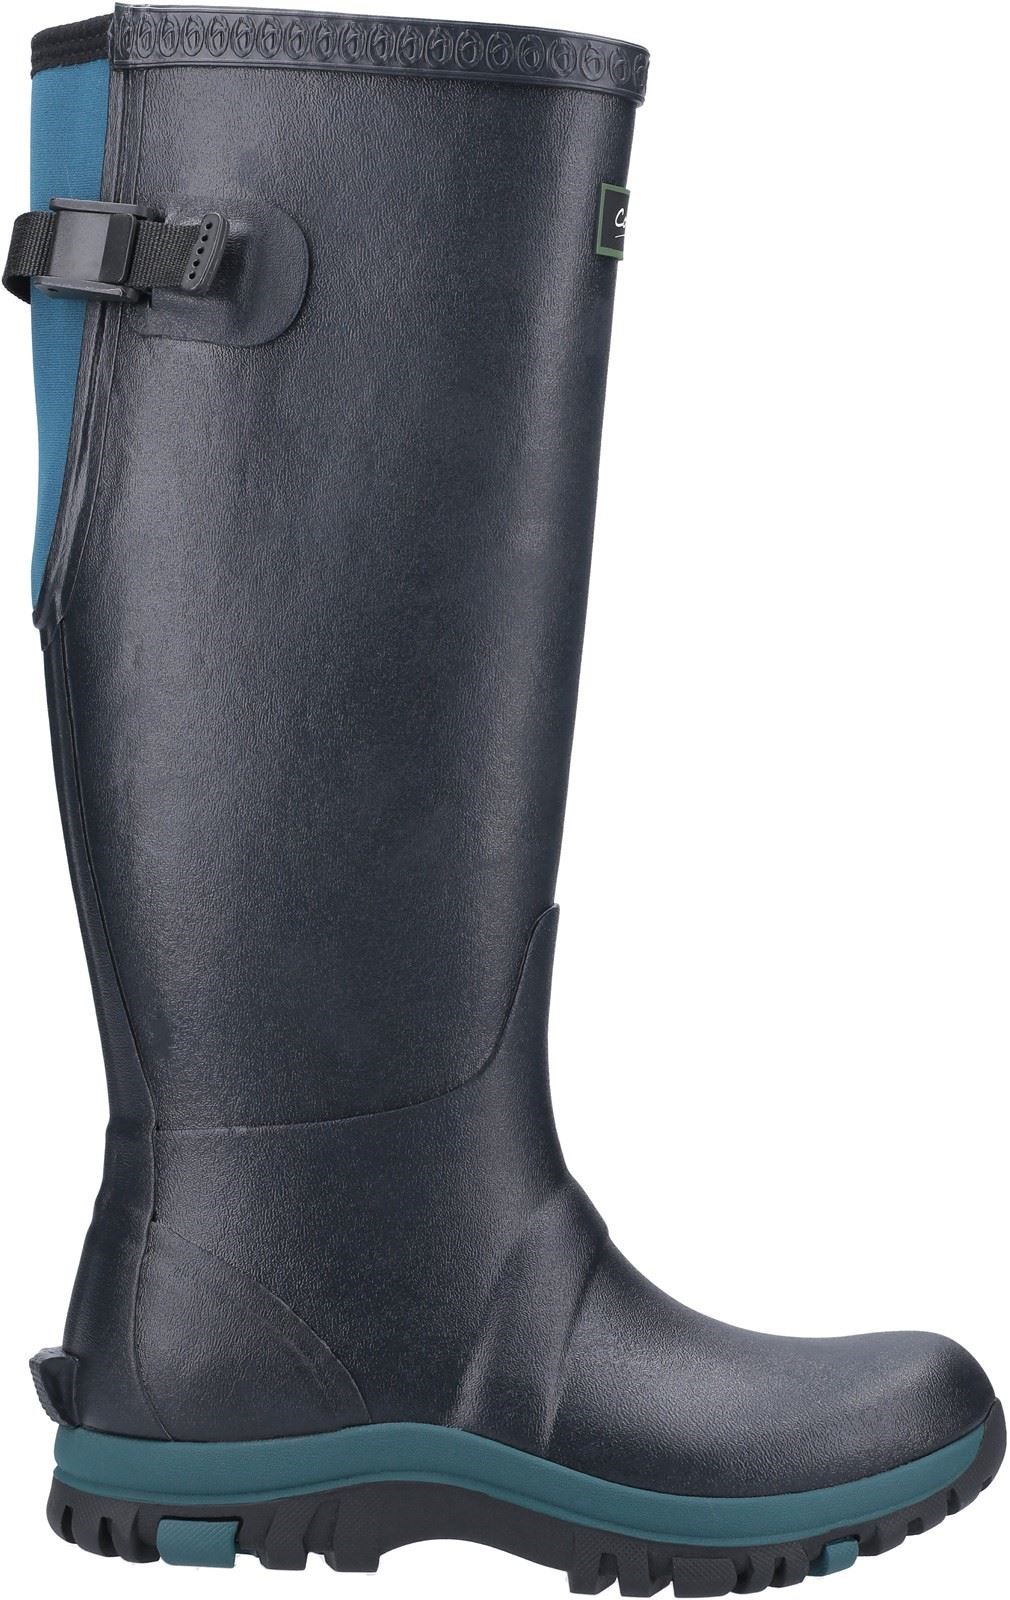 Cotswold Realm Adjustable Wellington Boots